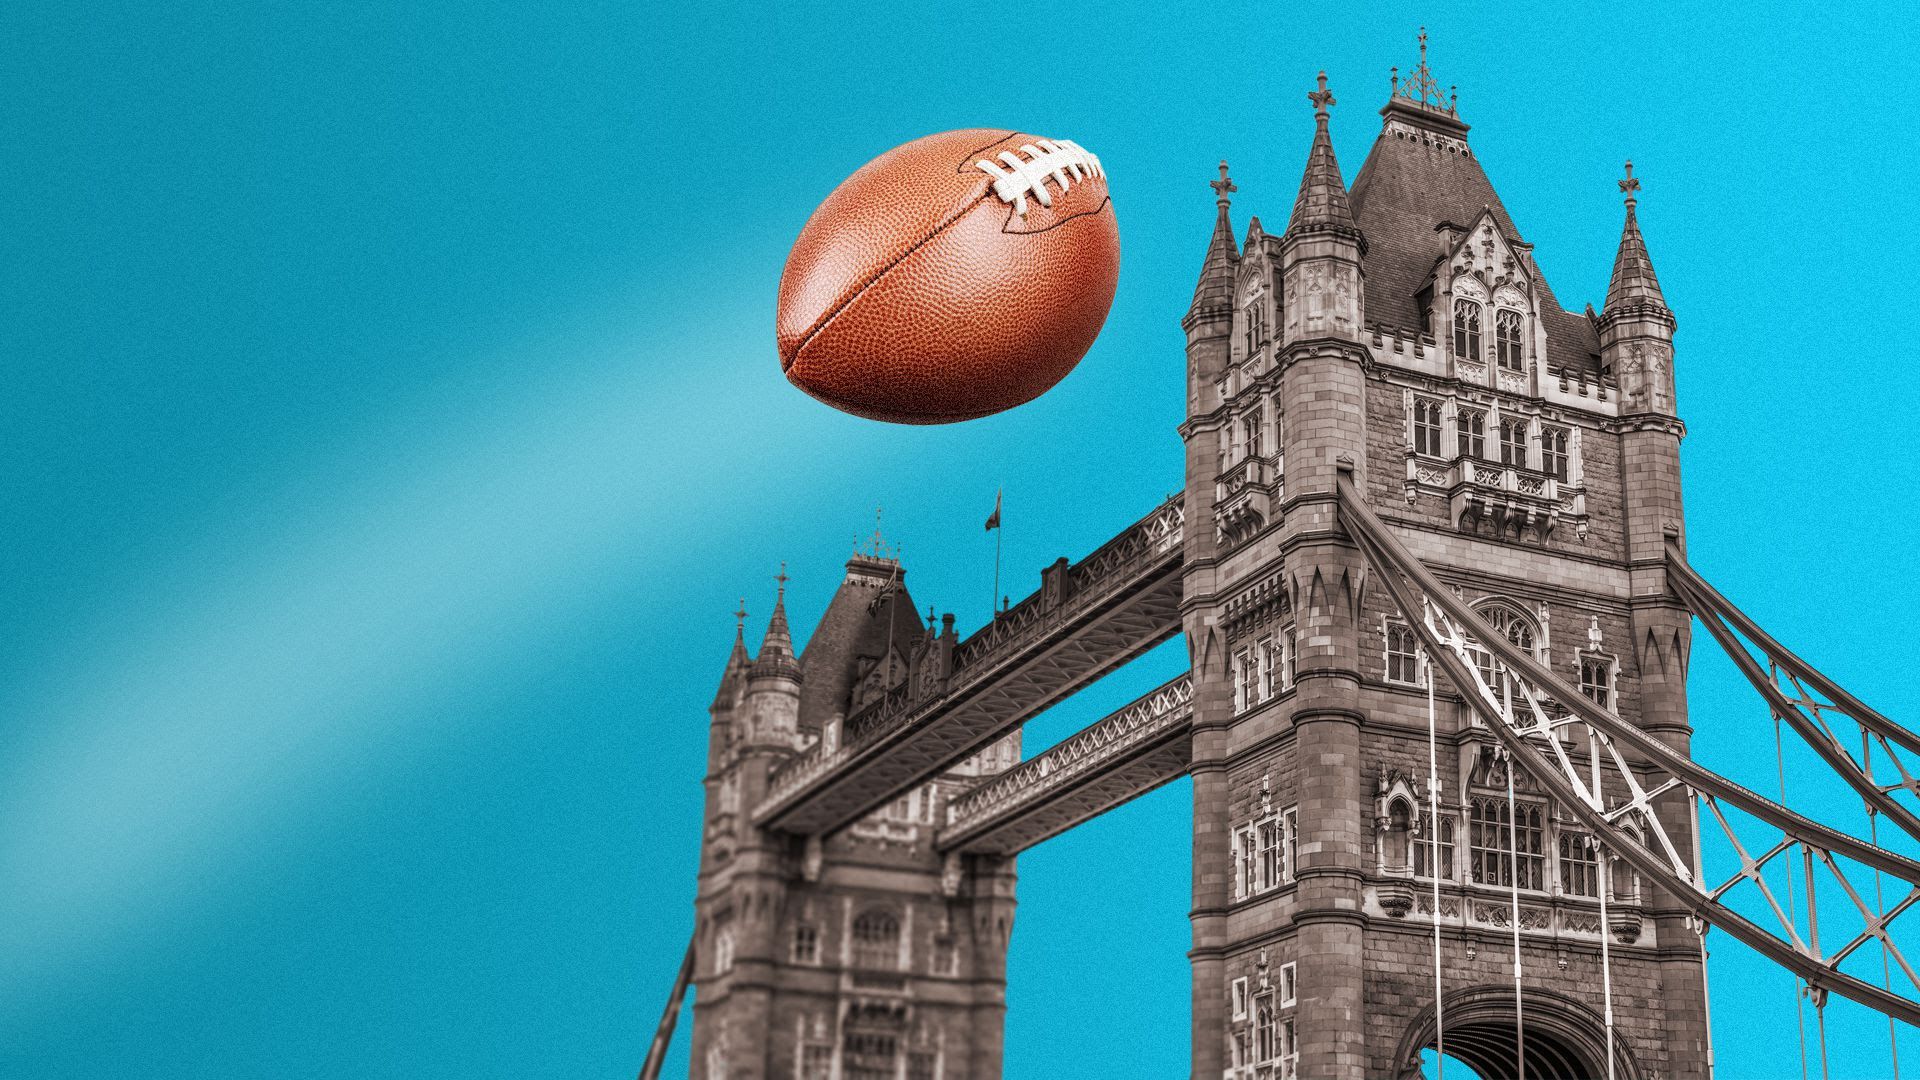 Illustration of the London Bridge with a football over it.